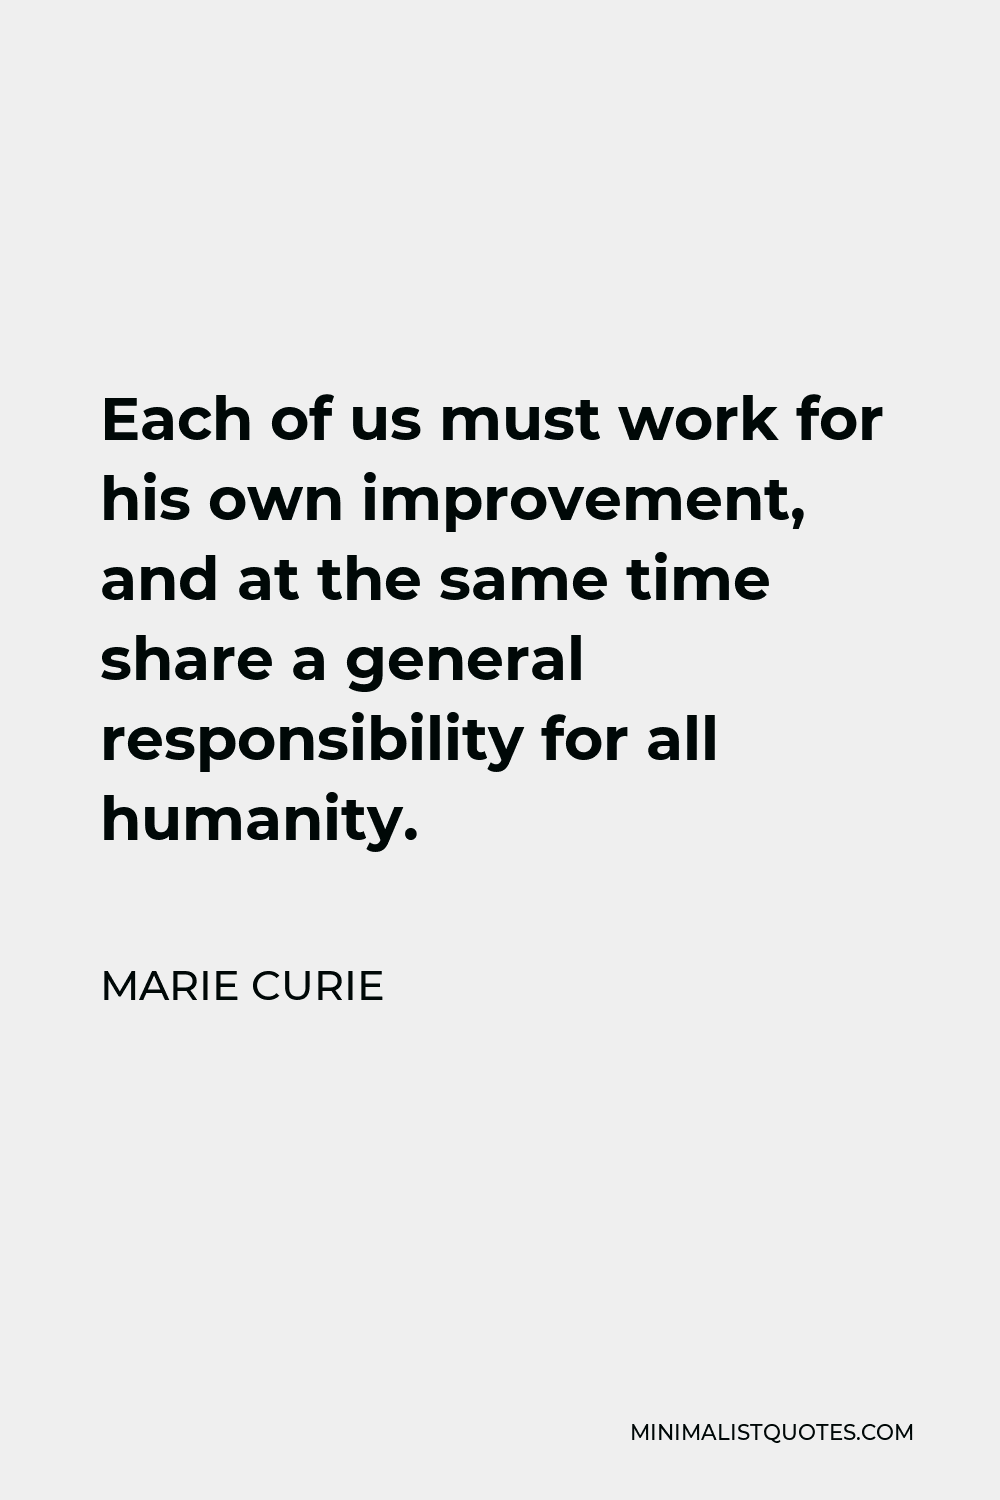 Marie Curie Quote - Each of us must work for his own improvement, and at the same time share a general responsibility for all humanity.